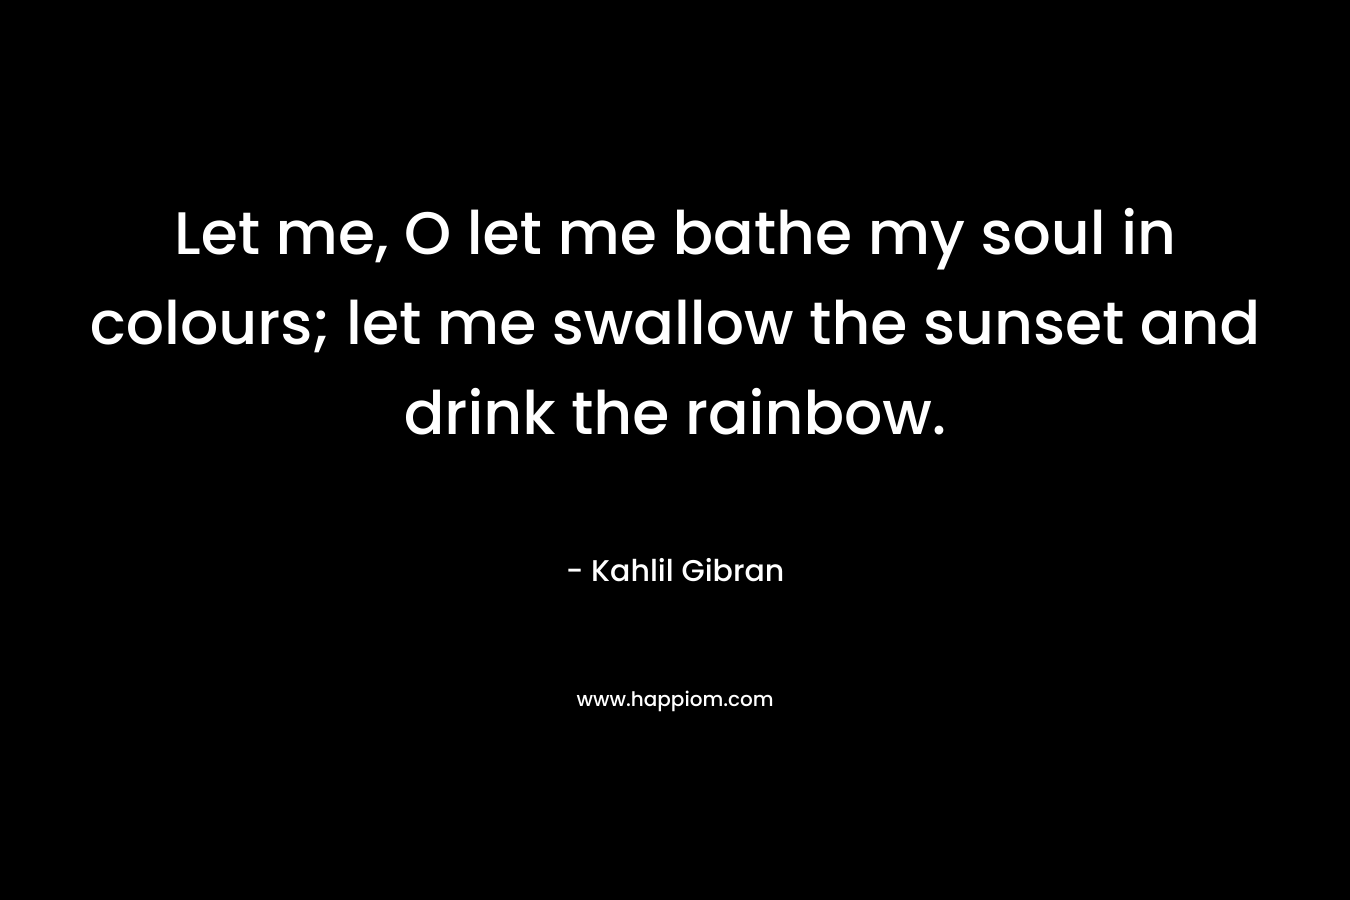 Let me, O let me bathe my soul in colours; let me swallow the sunset and drink the rainbow. – Kahlil Gibran